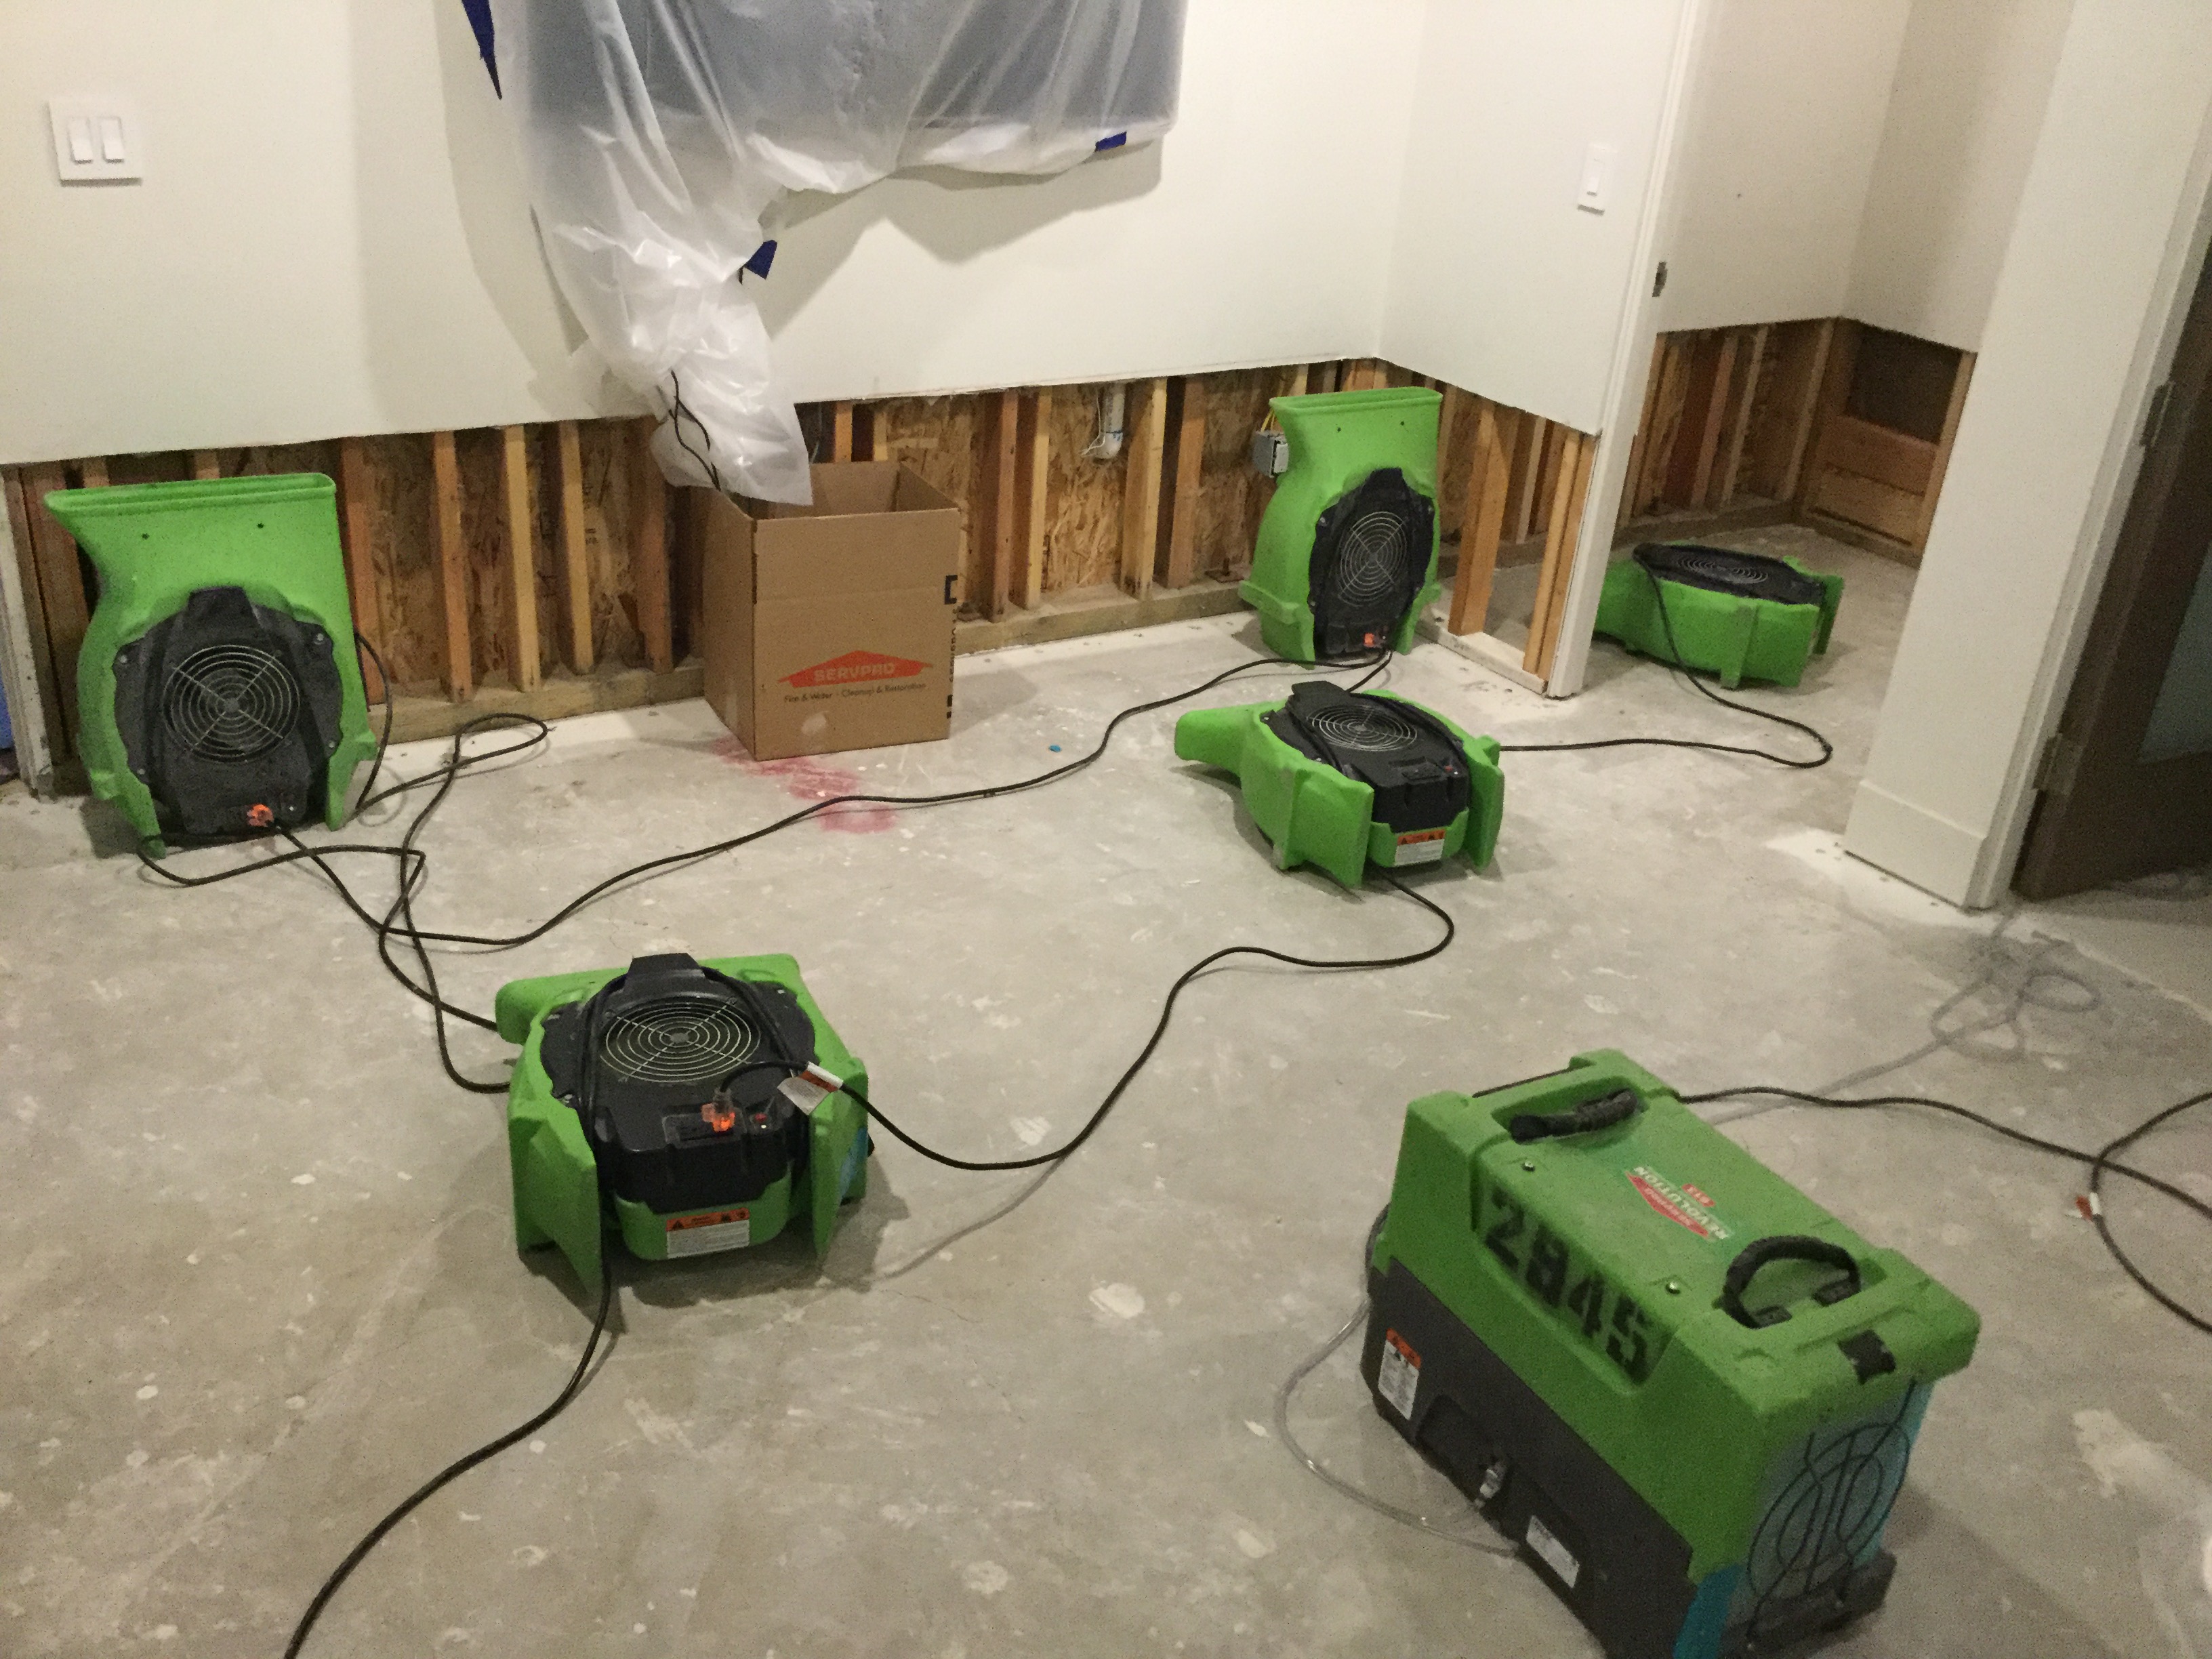 If your home experiences severe water damage, give our SERVPRO of Anaheim team a call.